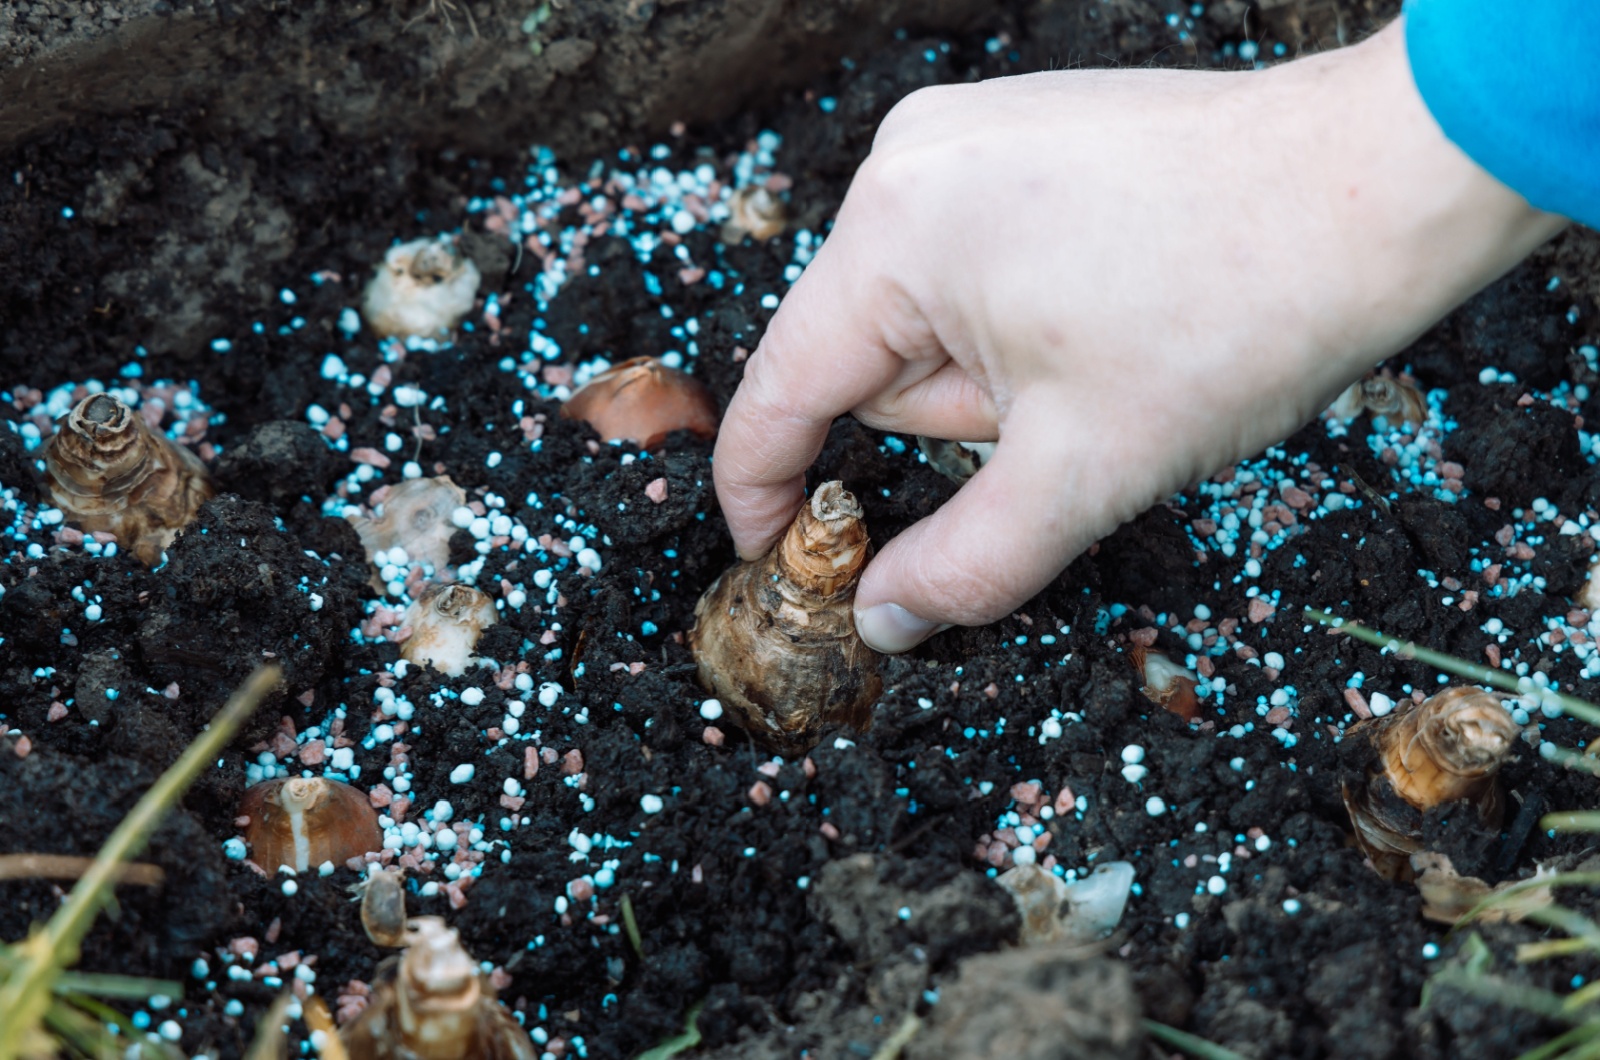 Planting daffodil bulbs in the ground in autumn